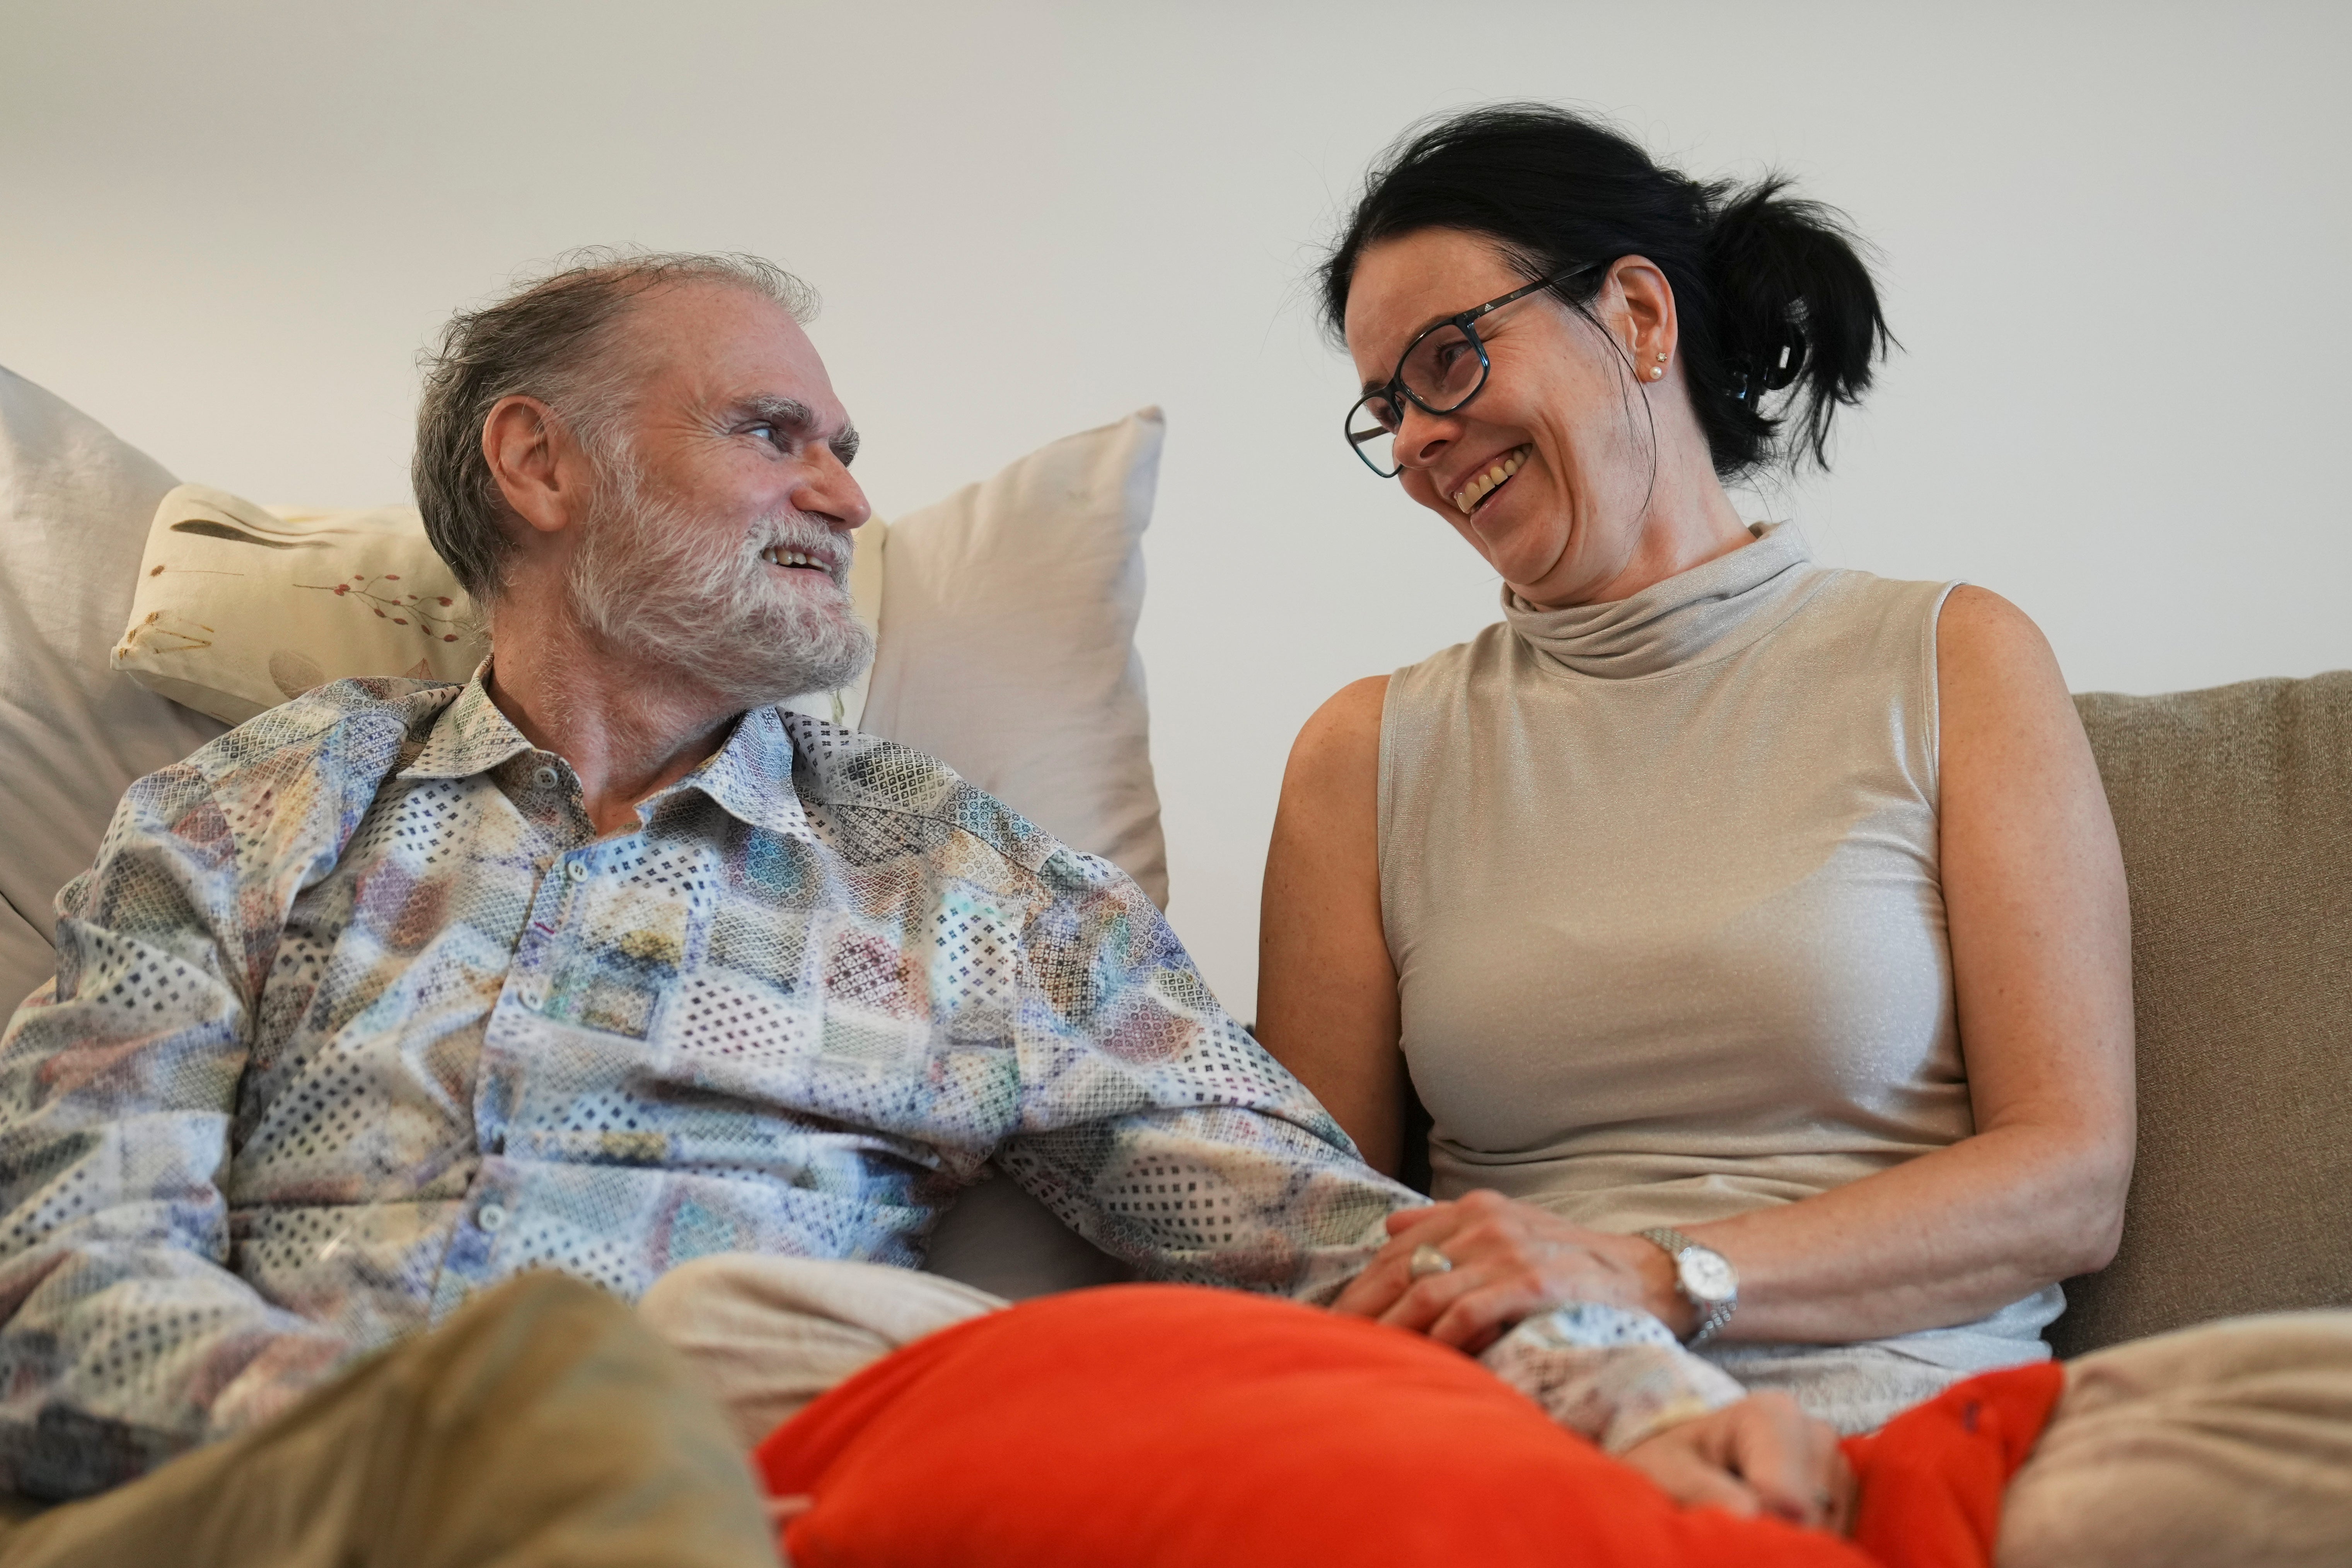 Michael Bommer, left, who is terminally ill with colon cancer, looks at his wife Anett Bommer